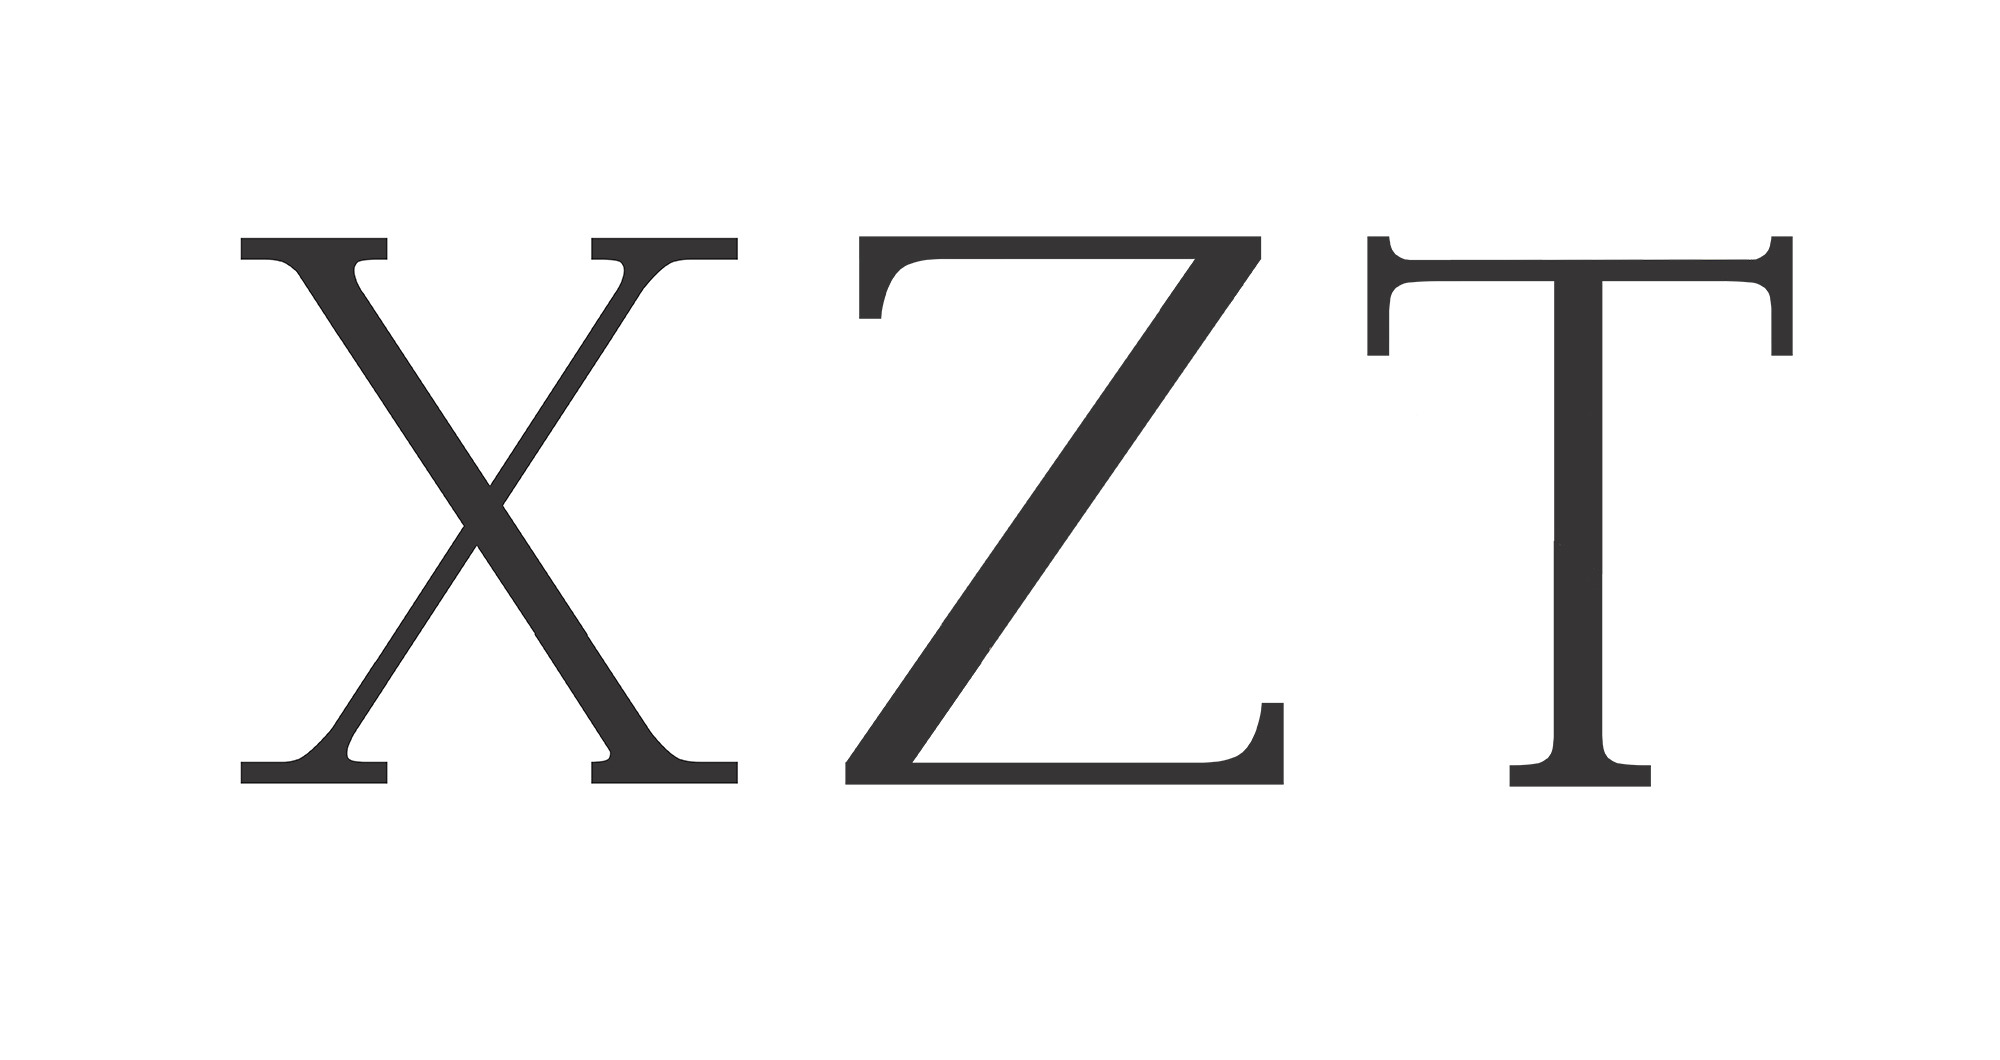 XZT letters. Please what font is? Thanks!